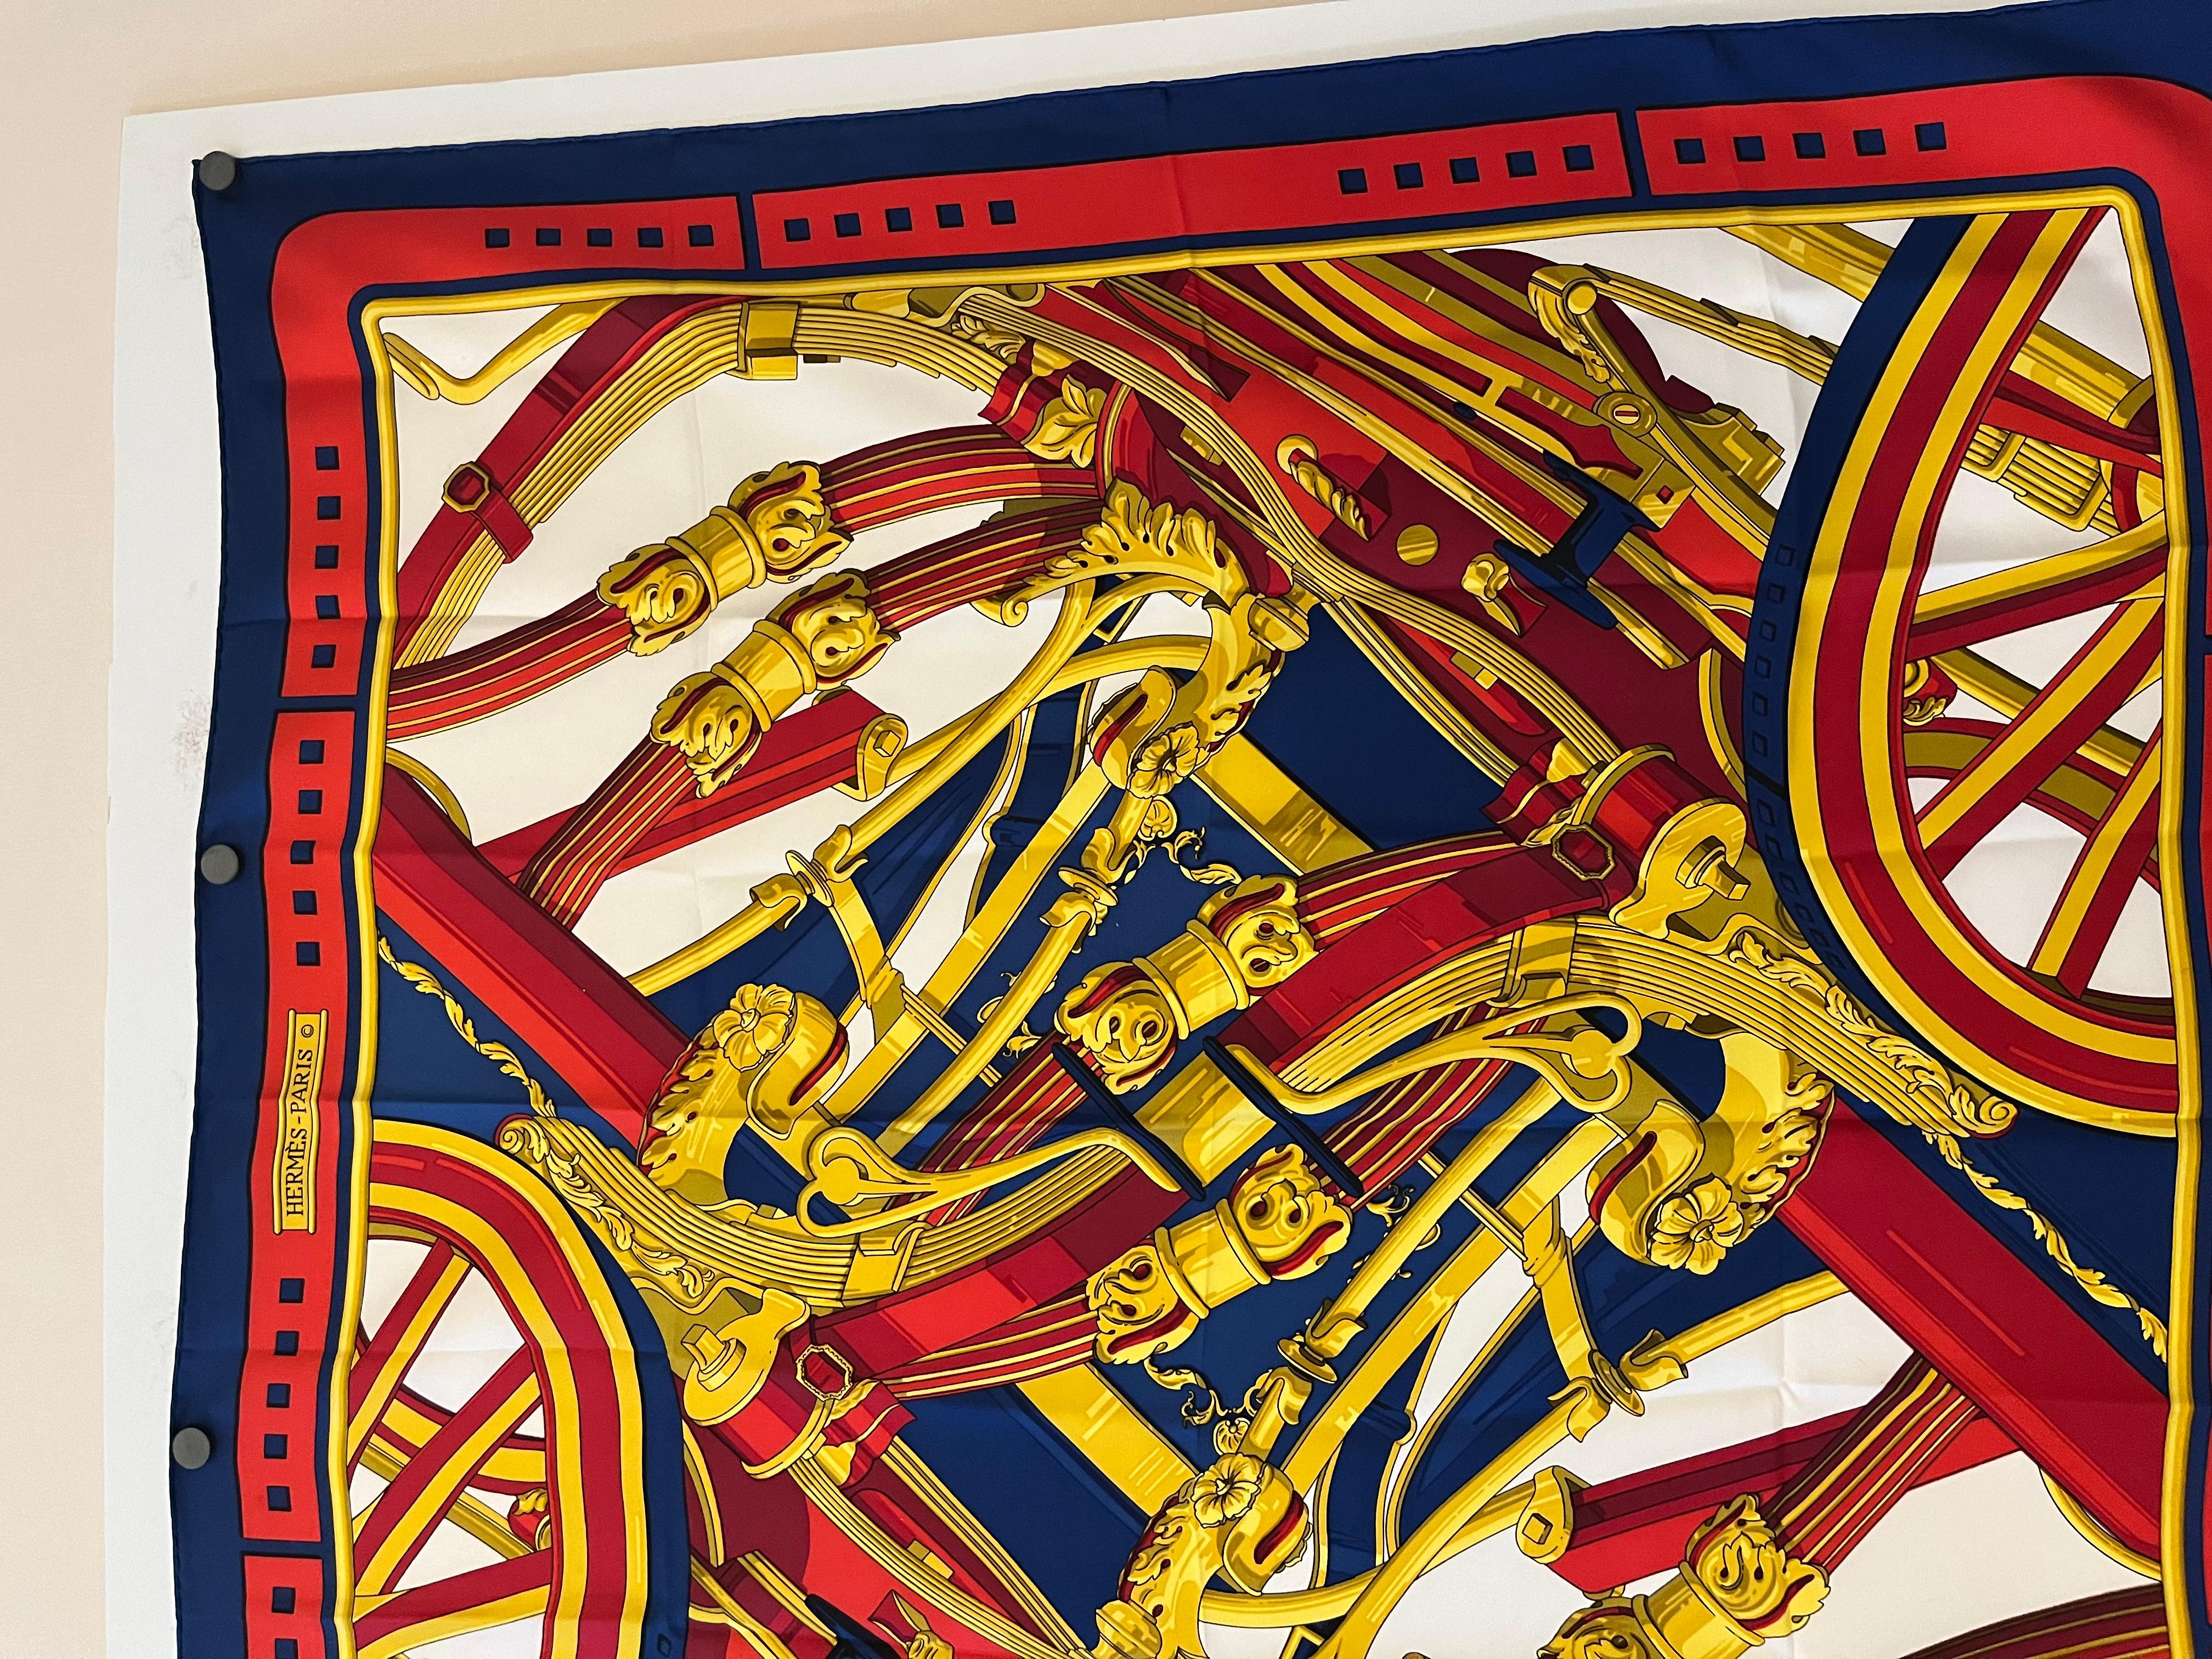 This is a 1970 Hermes silk scarf designed by Cathy Latham. The design represents movement featuring carriage wheels, pistons and highly decorated gold-tone fittings. In fact it also represent the House of Hermes beginnings.
The silk scarf is 35